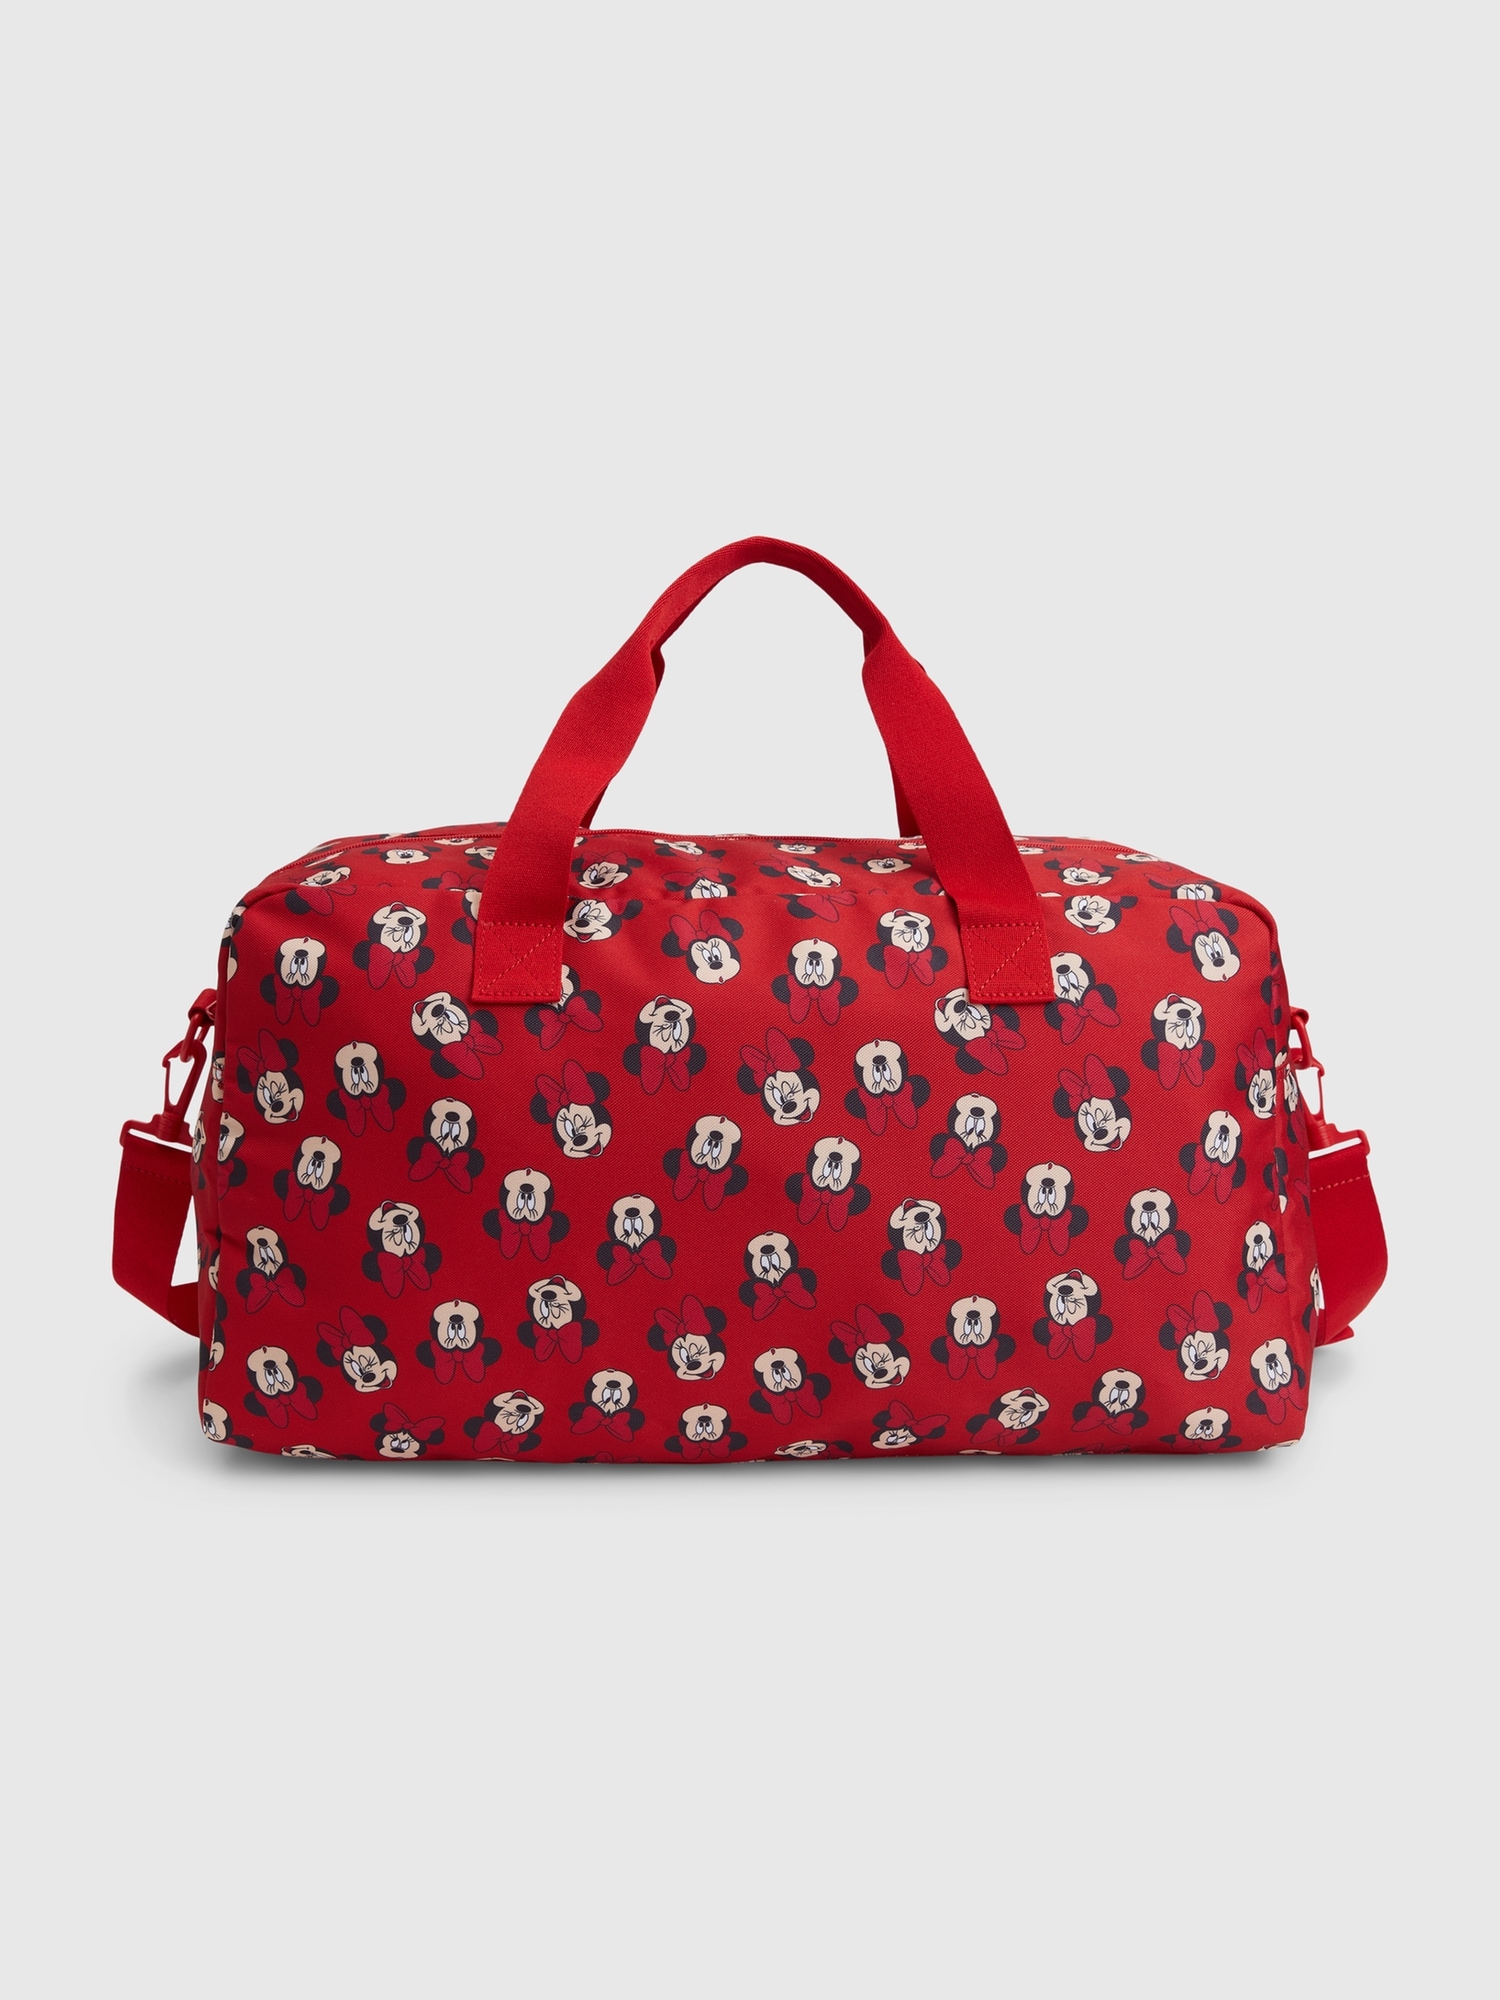 Disney Cross Body Bag for Women, Red Minnie Mouse Bag,Disney Gifts for Women